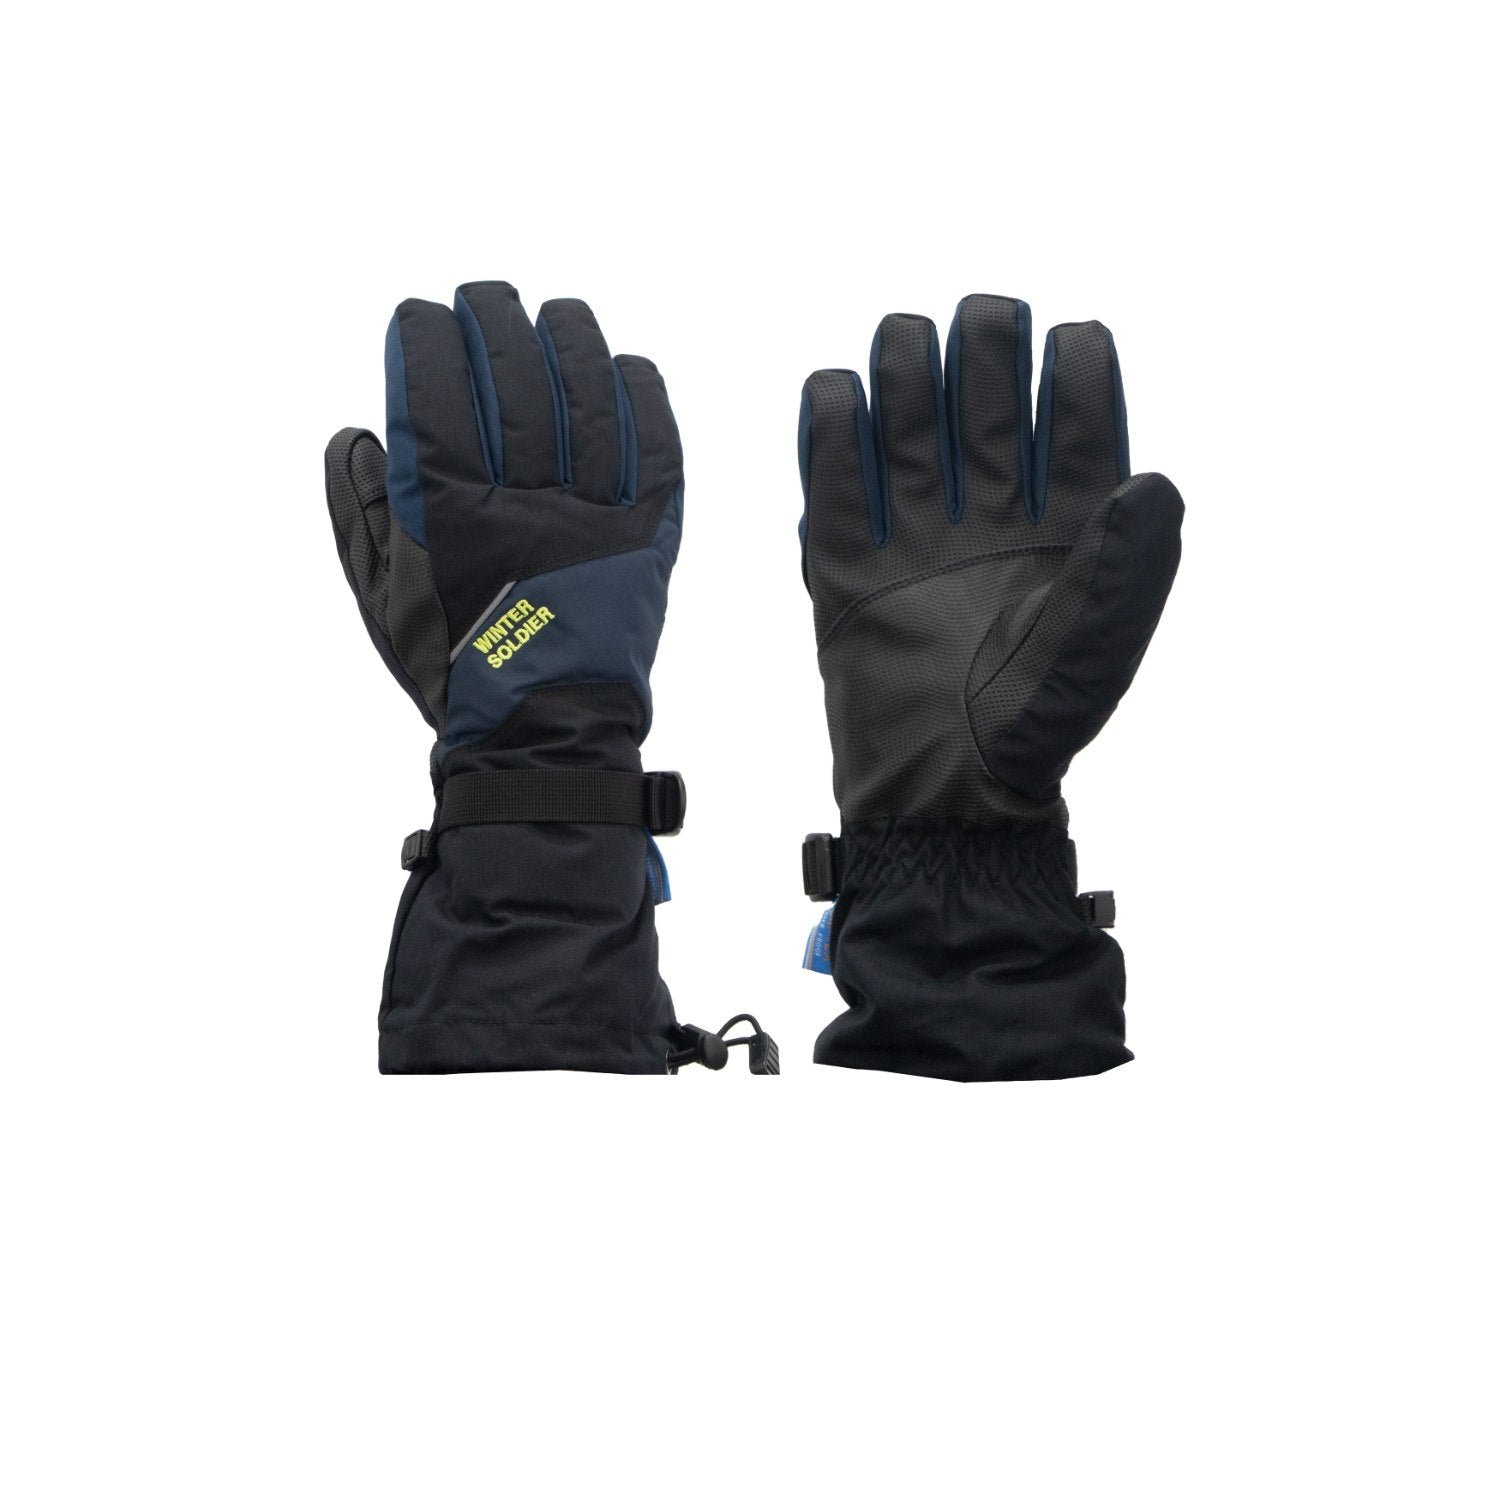 Buy K2 Extreme Cold Weather Gloves at Gokyo Outdoor Clothing & Gear